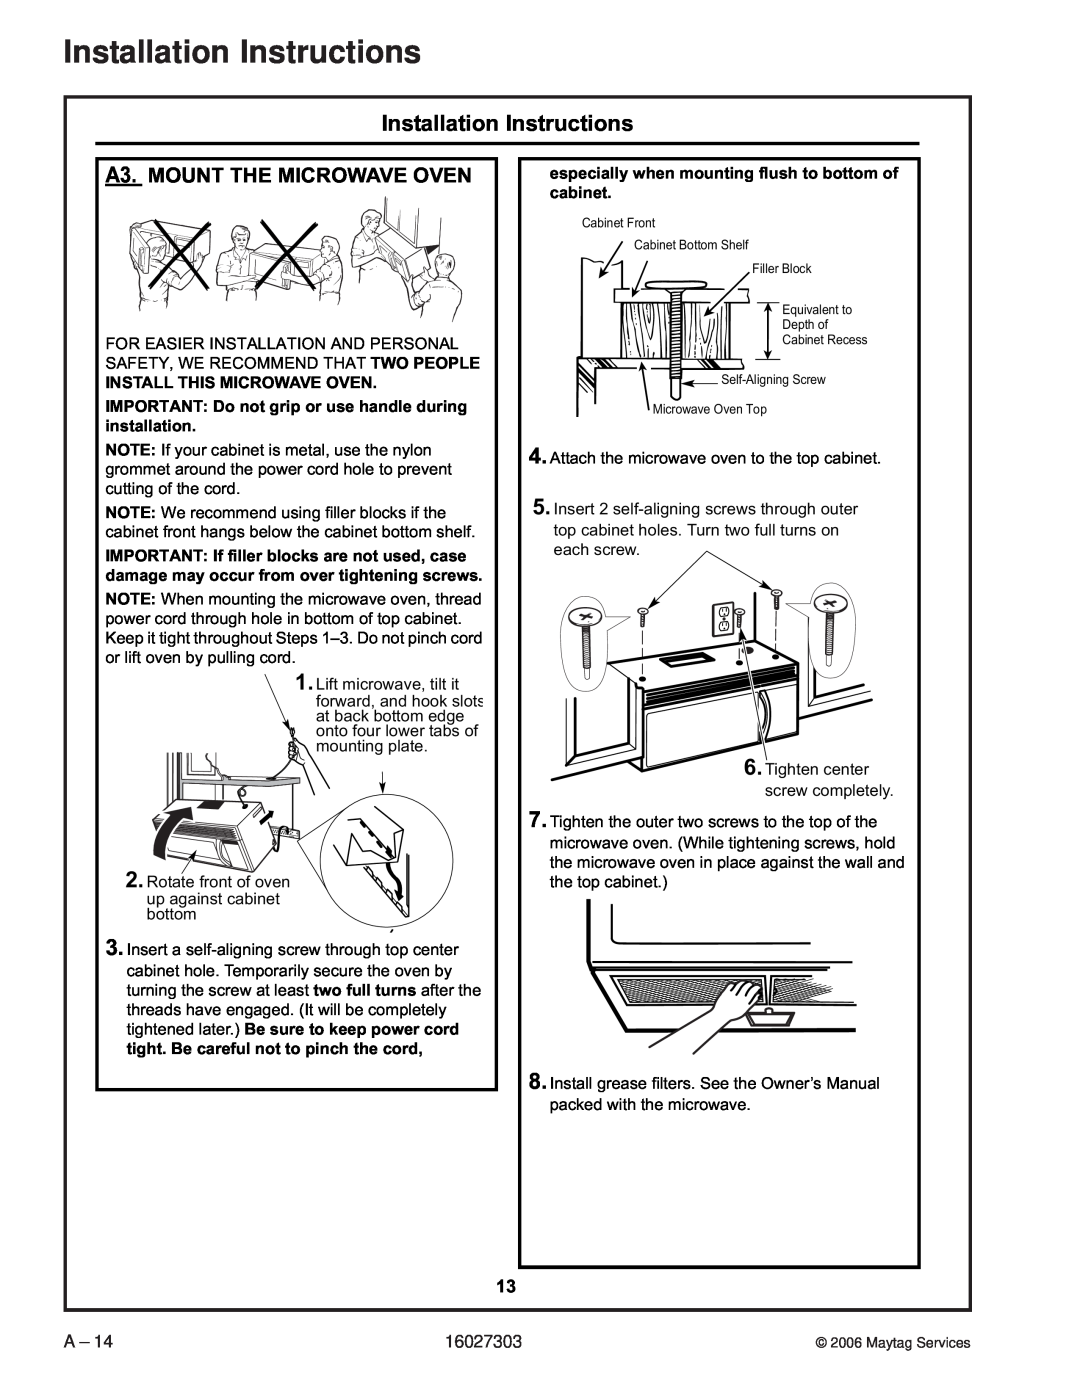 Maytag UMV1152CA manual A3.MOUNT THE MICROWAVE OVEN, Installation Instructions 